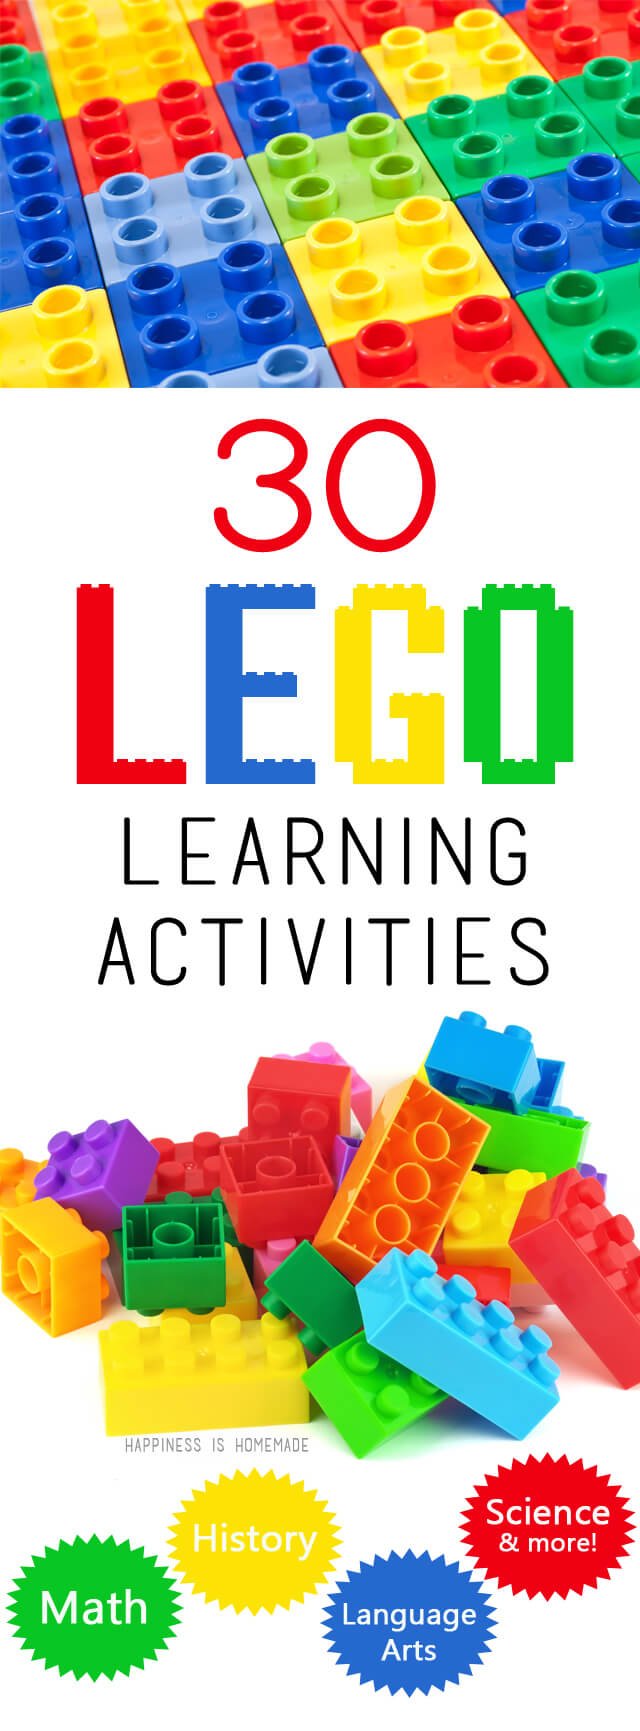 LEGO Learning Activities Happiness Is Homemade